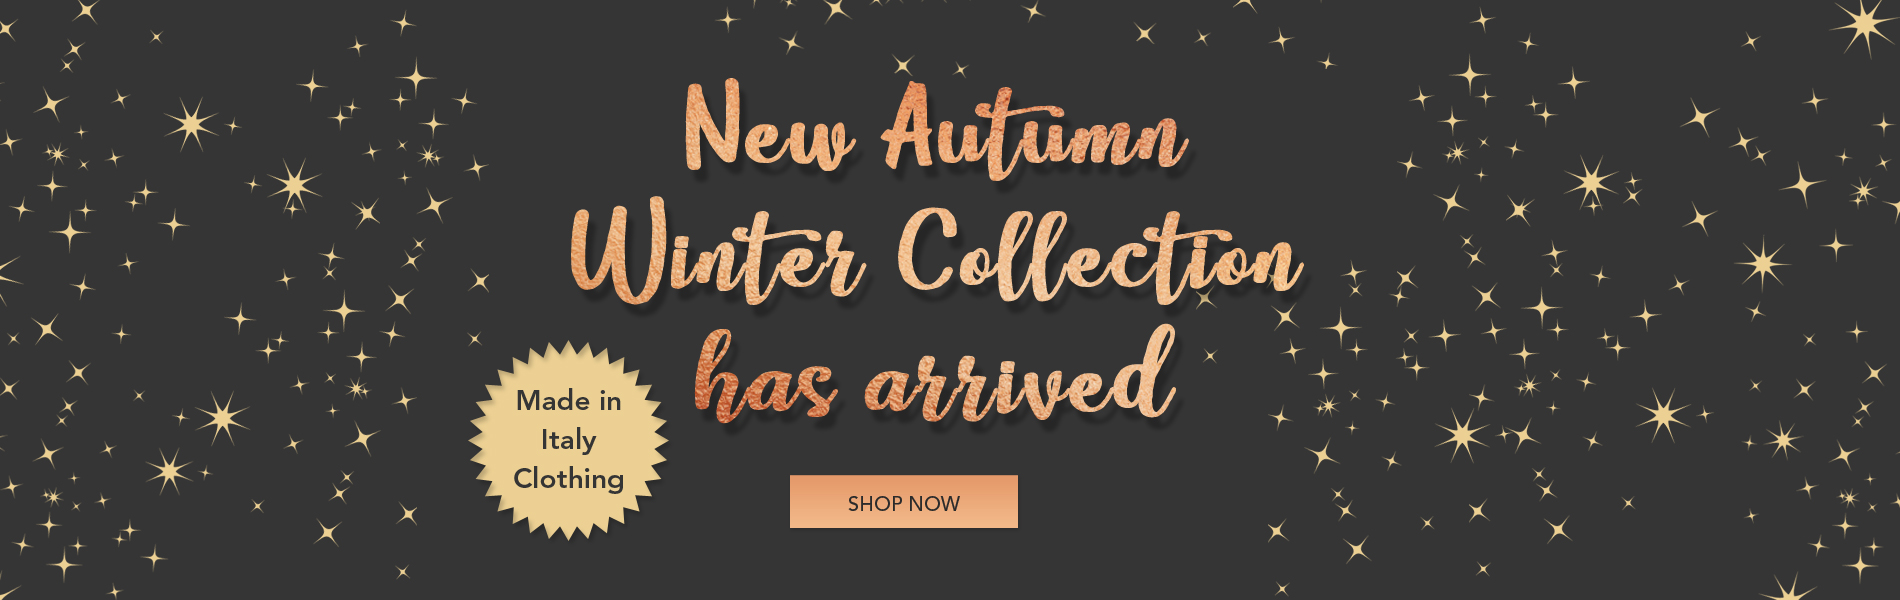 New Autumn Winter Collection